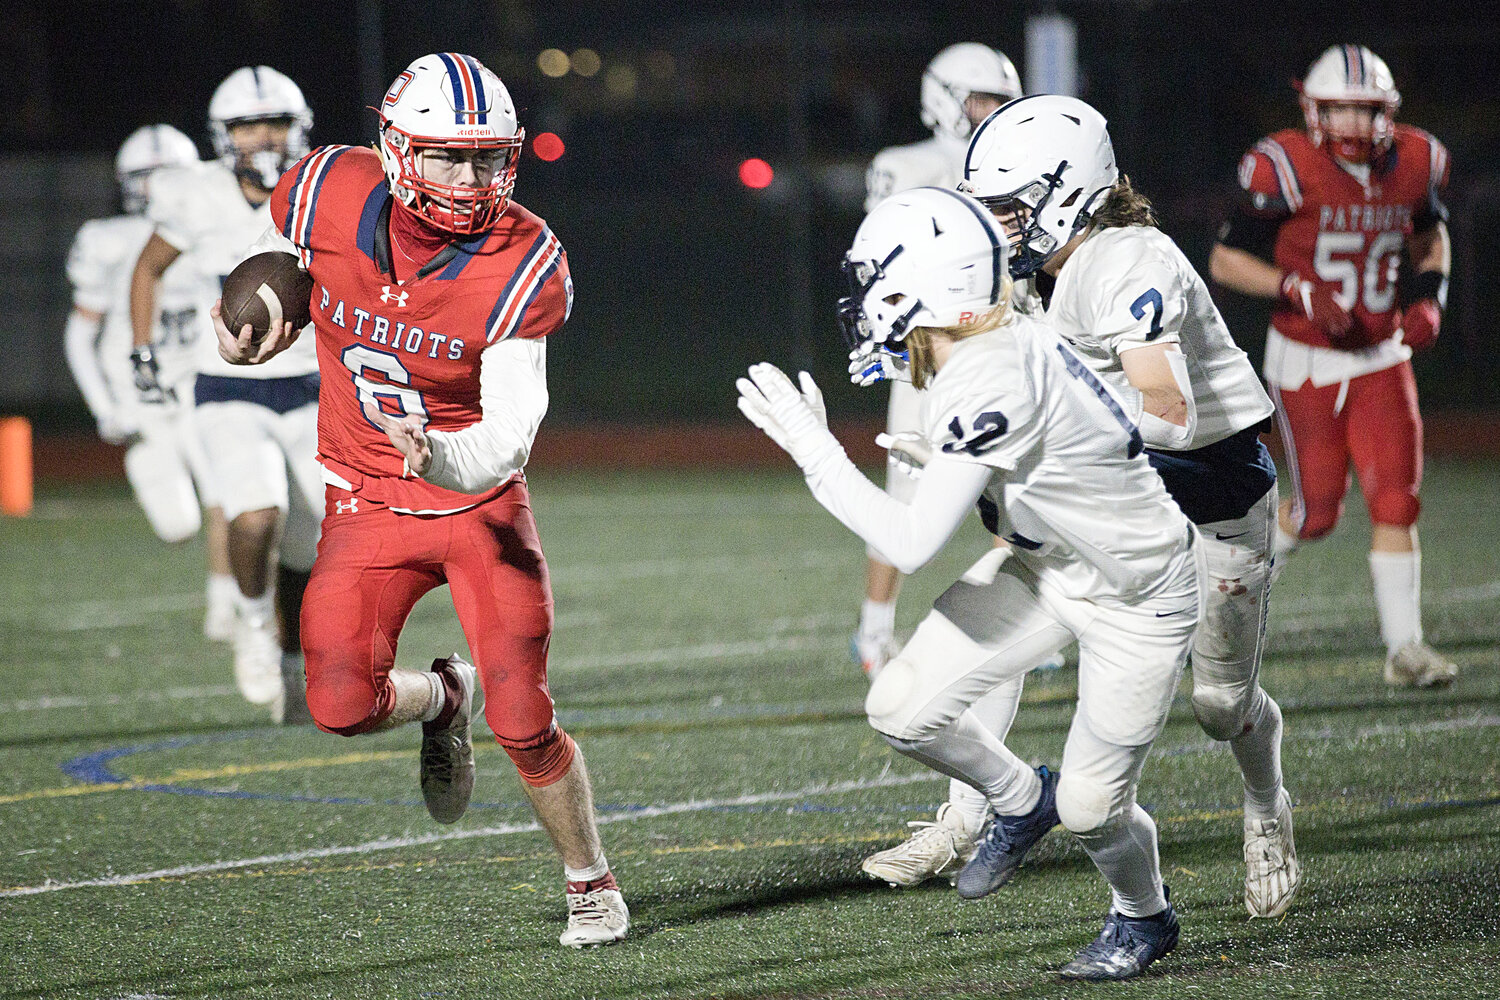 The Patriots’ Tyler Hurd makes a move as a pair of Westerly defenders close in during last Thursday night’s game at Portsmouth.